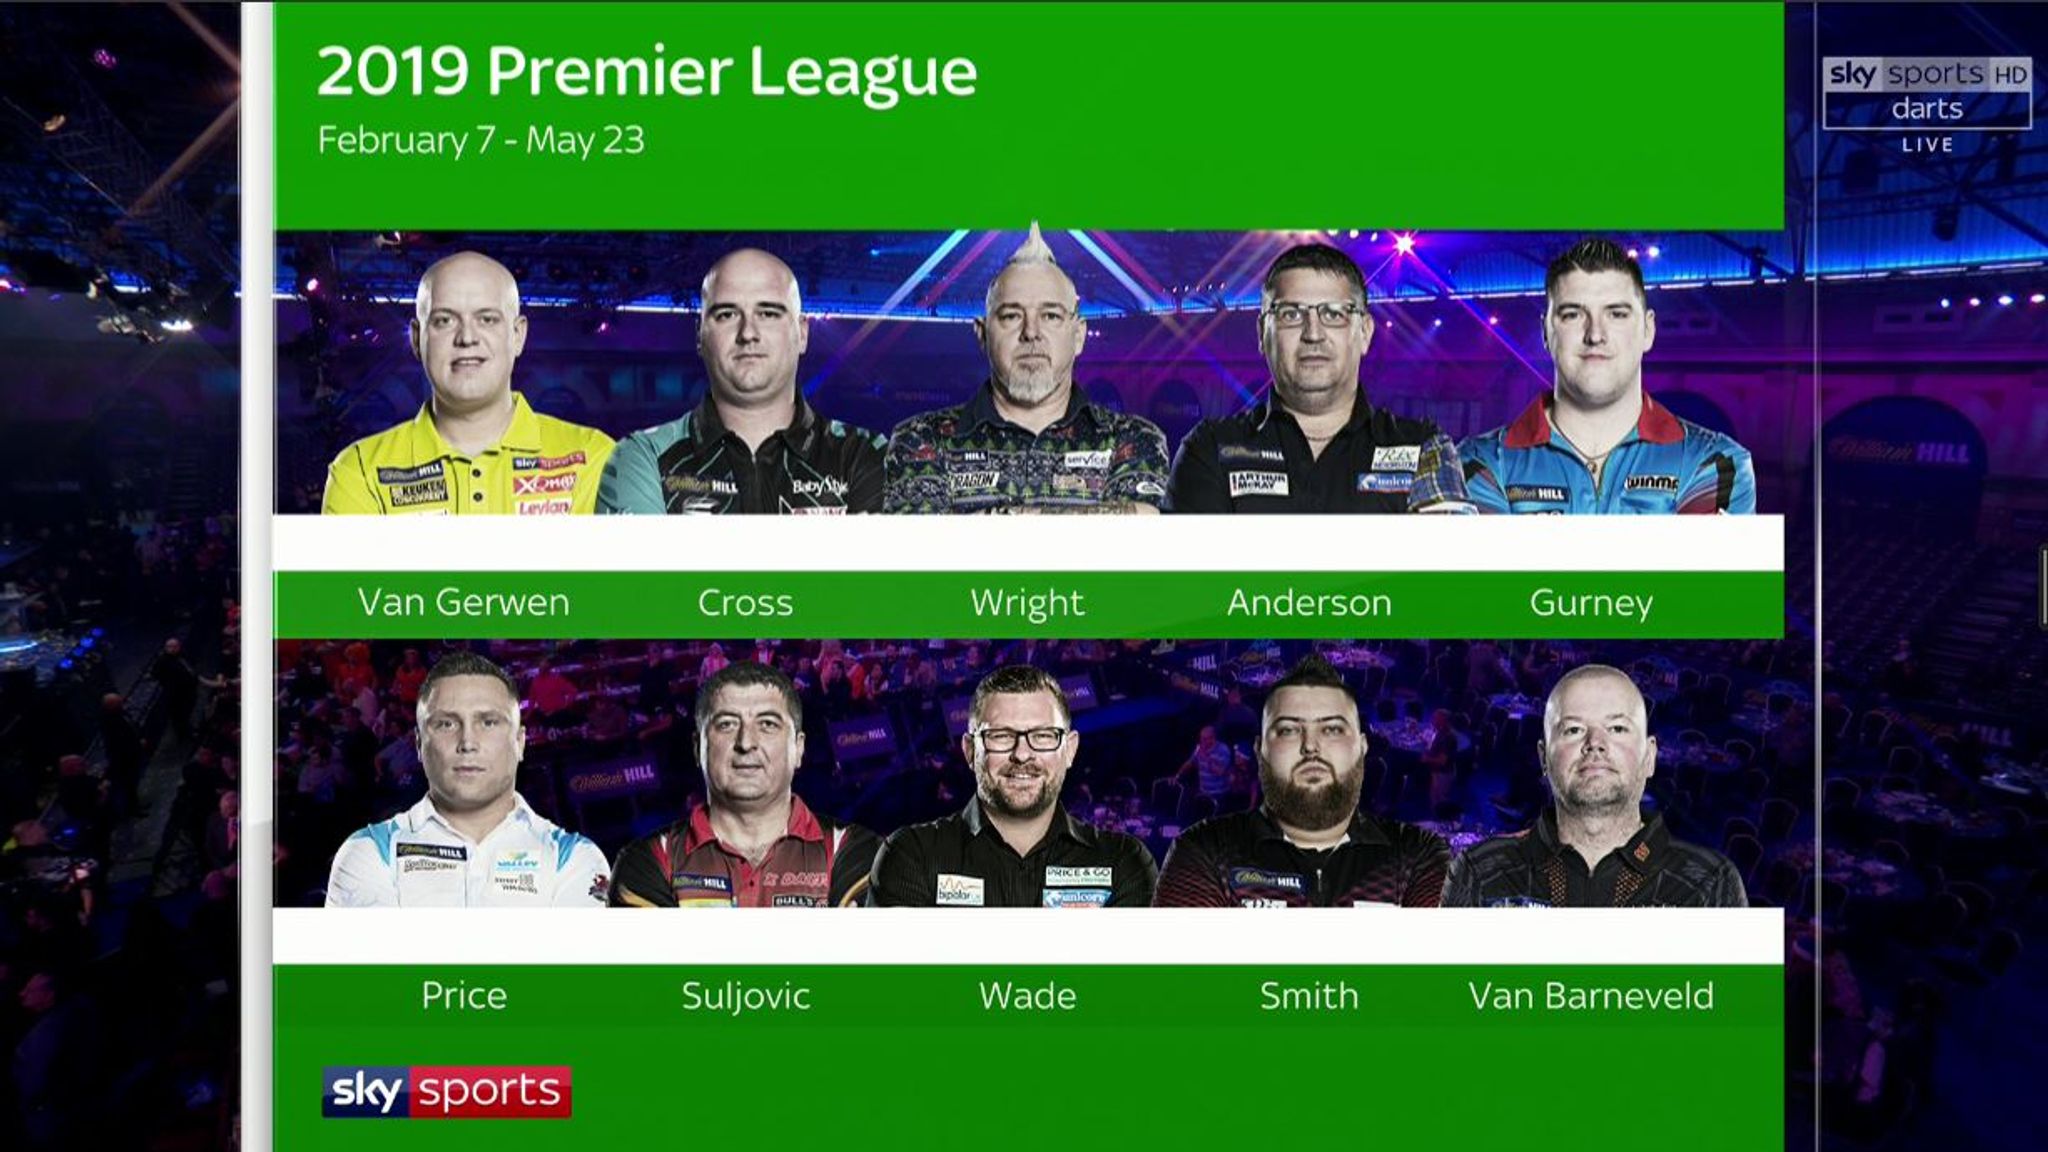 Raymond van Barneveld features in line-up for 2019 Premier League Darts | News | Sky Sports